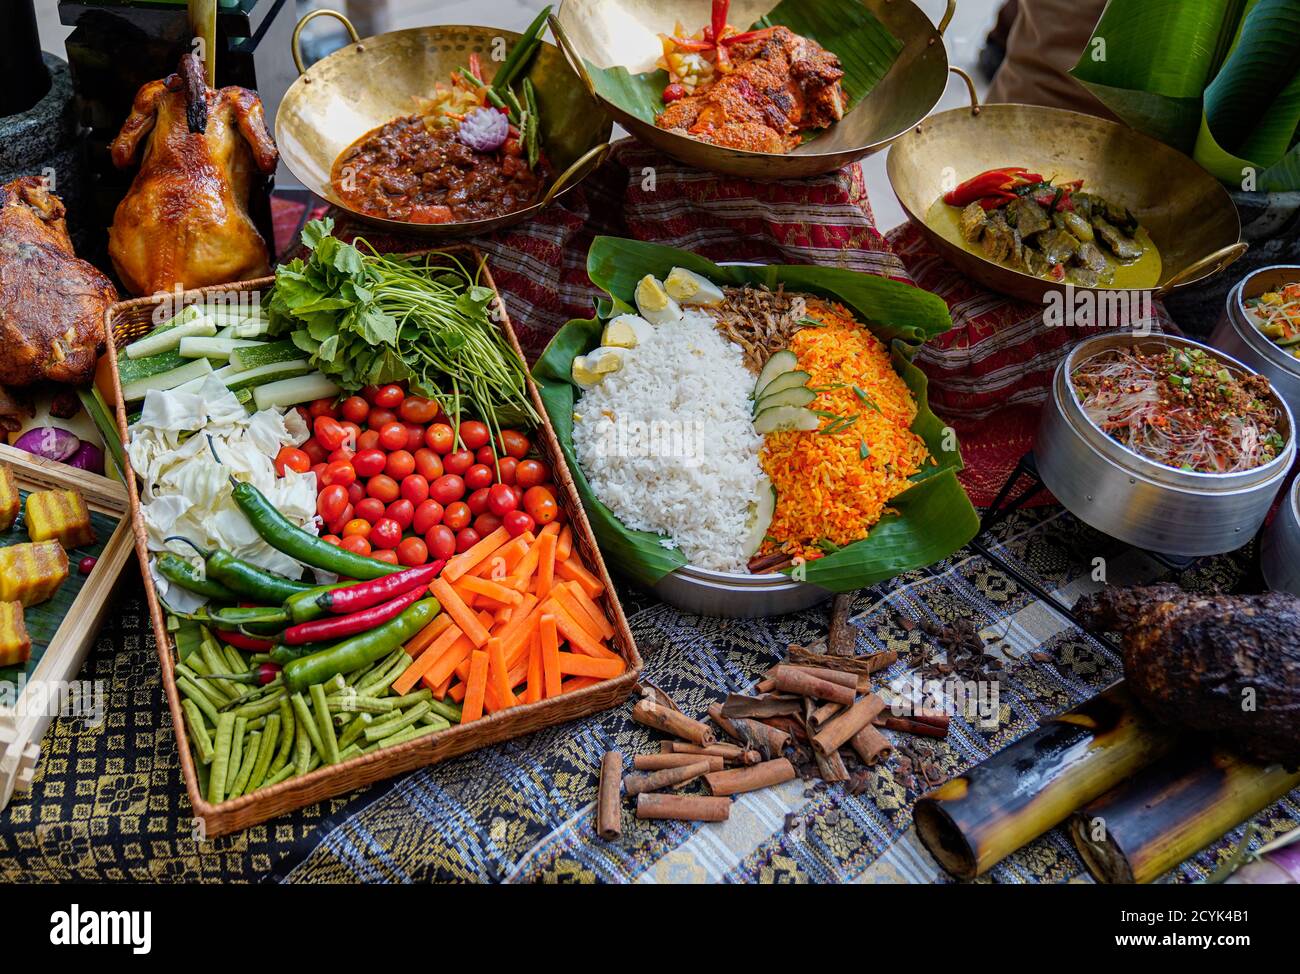 Food Table ready for the Ramadam Celebration in Malaysia Stock Photo